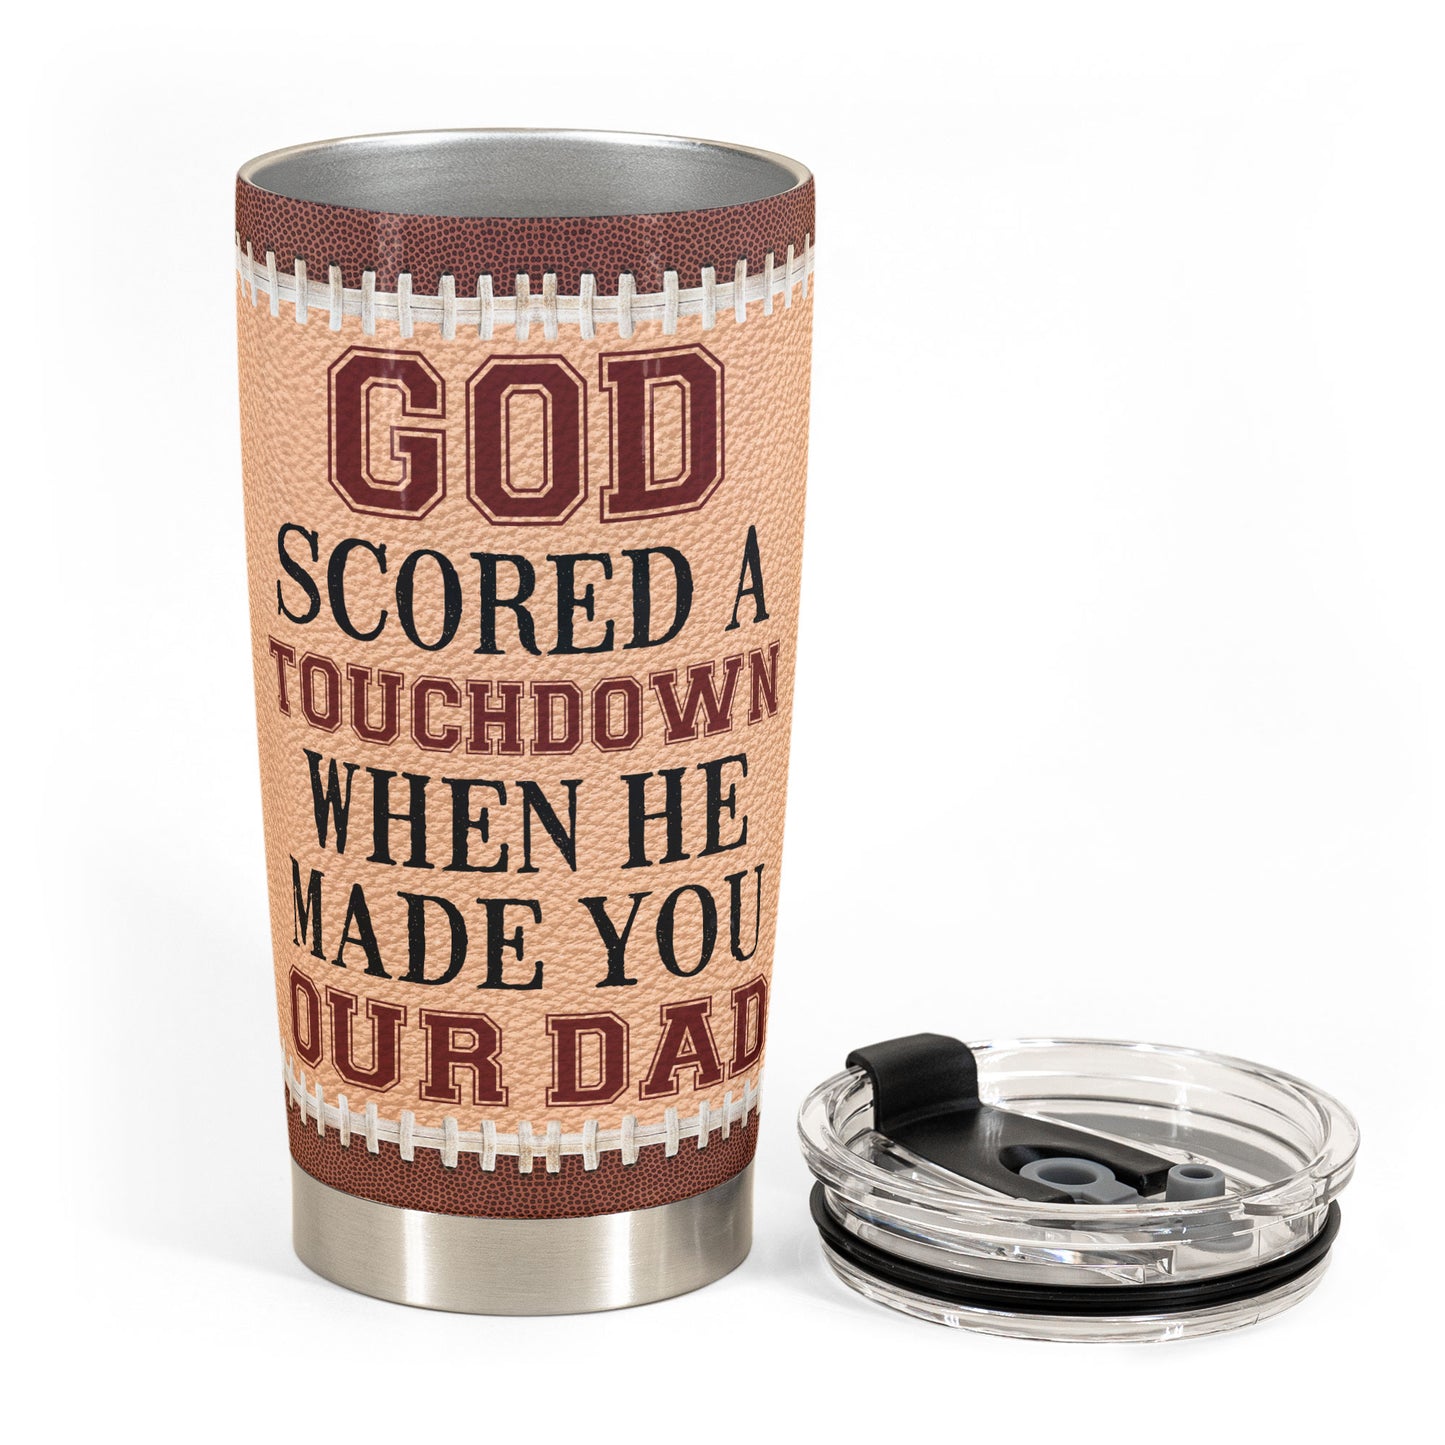 God Scored A Touchdown When He Made You Our Dad  - Personalized Tumbler Cup - Father's Day, Birthday, Football Gift For Dad, Father, Daughter, Son, Family Members